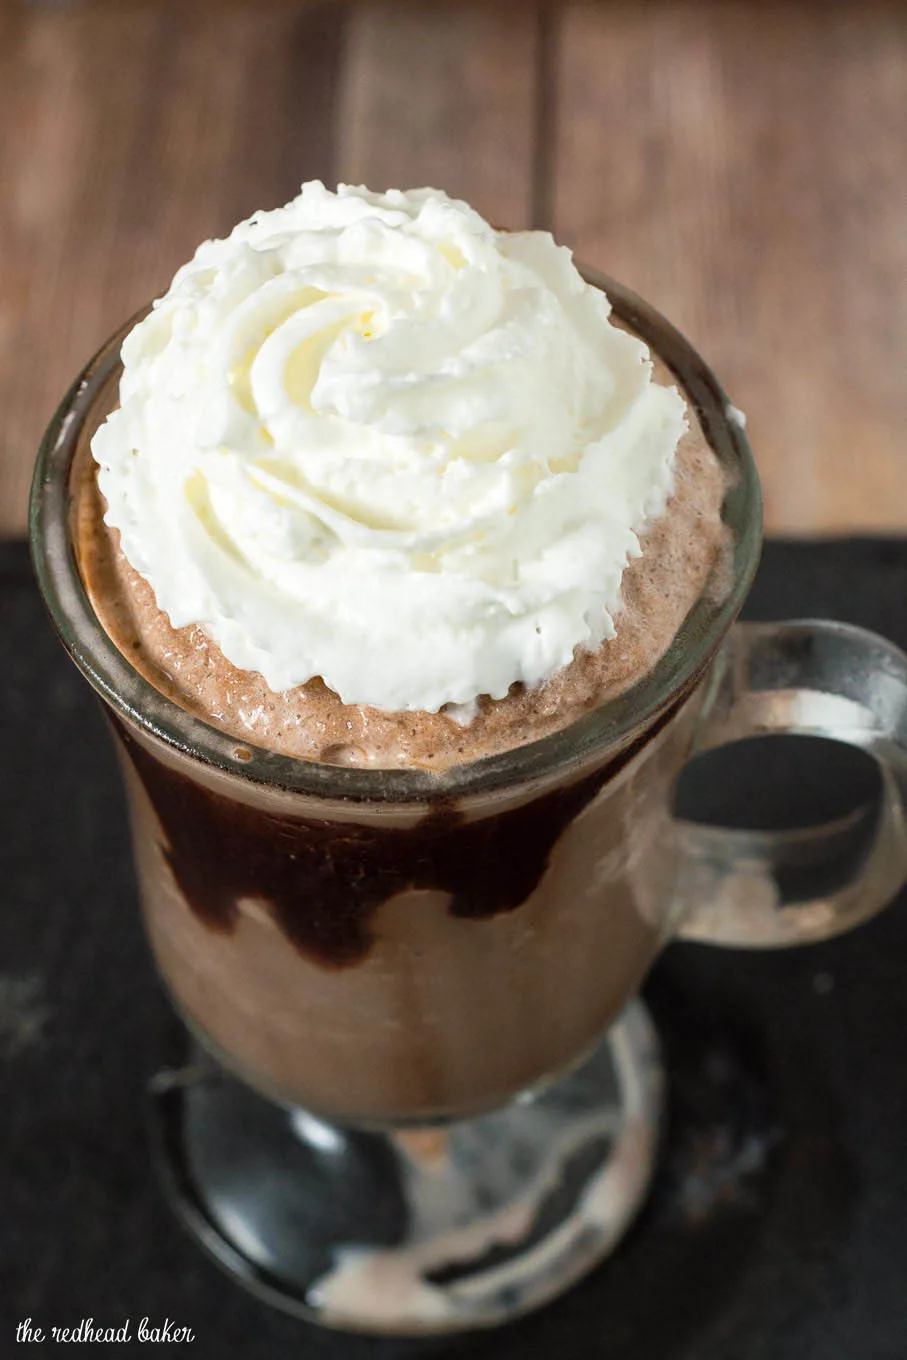 Creamy, delicious frozen hot chocolate is a fun twist on a classic treat. The texture is more like a blended cappuccino beverage than a milkshake. #Choctoberfest